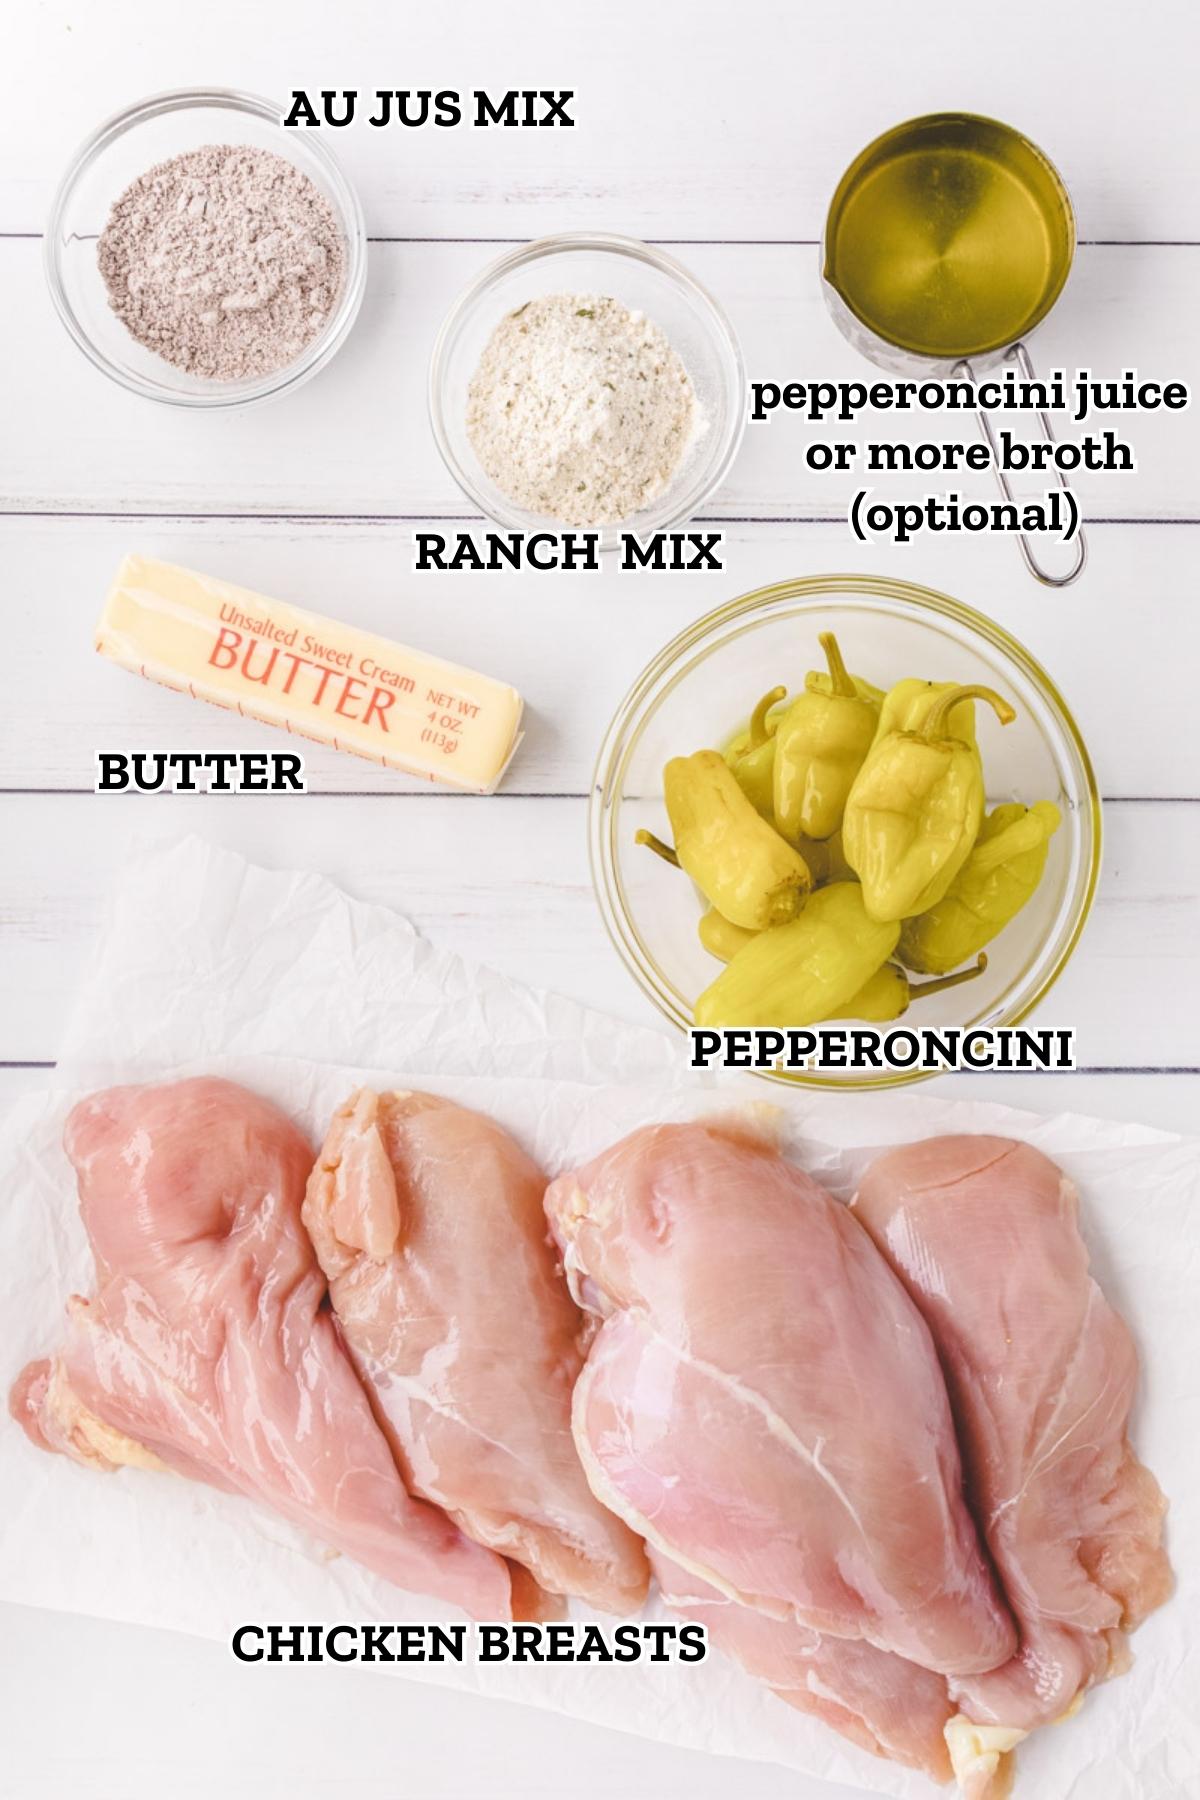 A labeled ingredient image of items needed to make Mississippi Chicken.